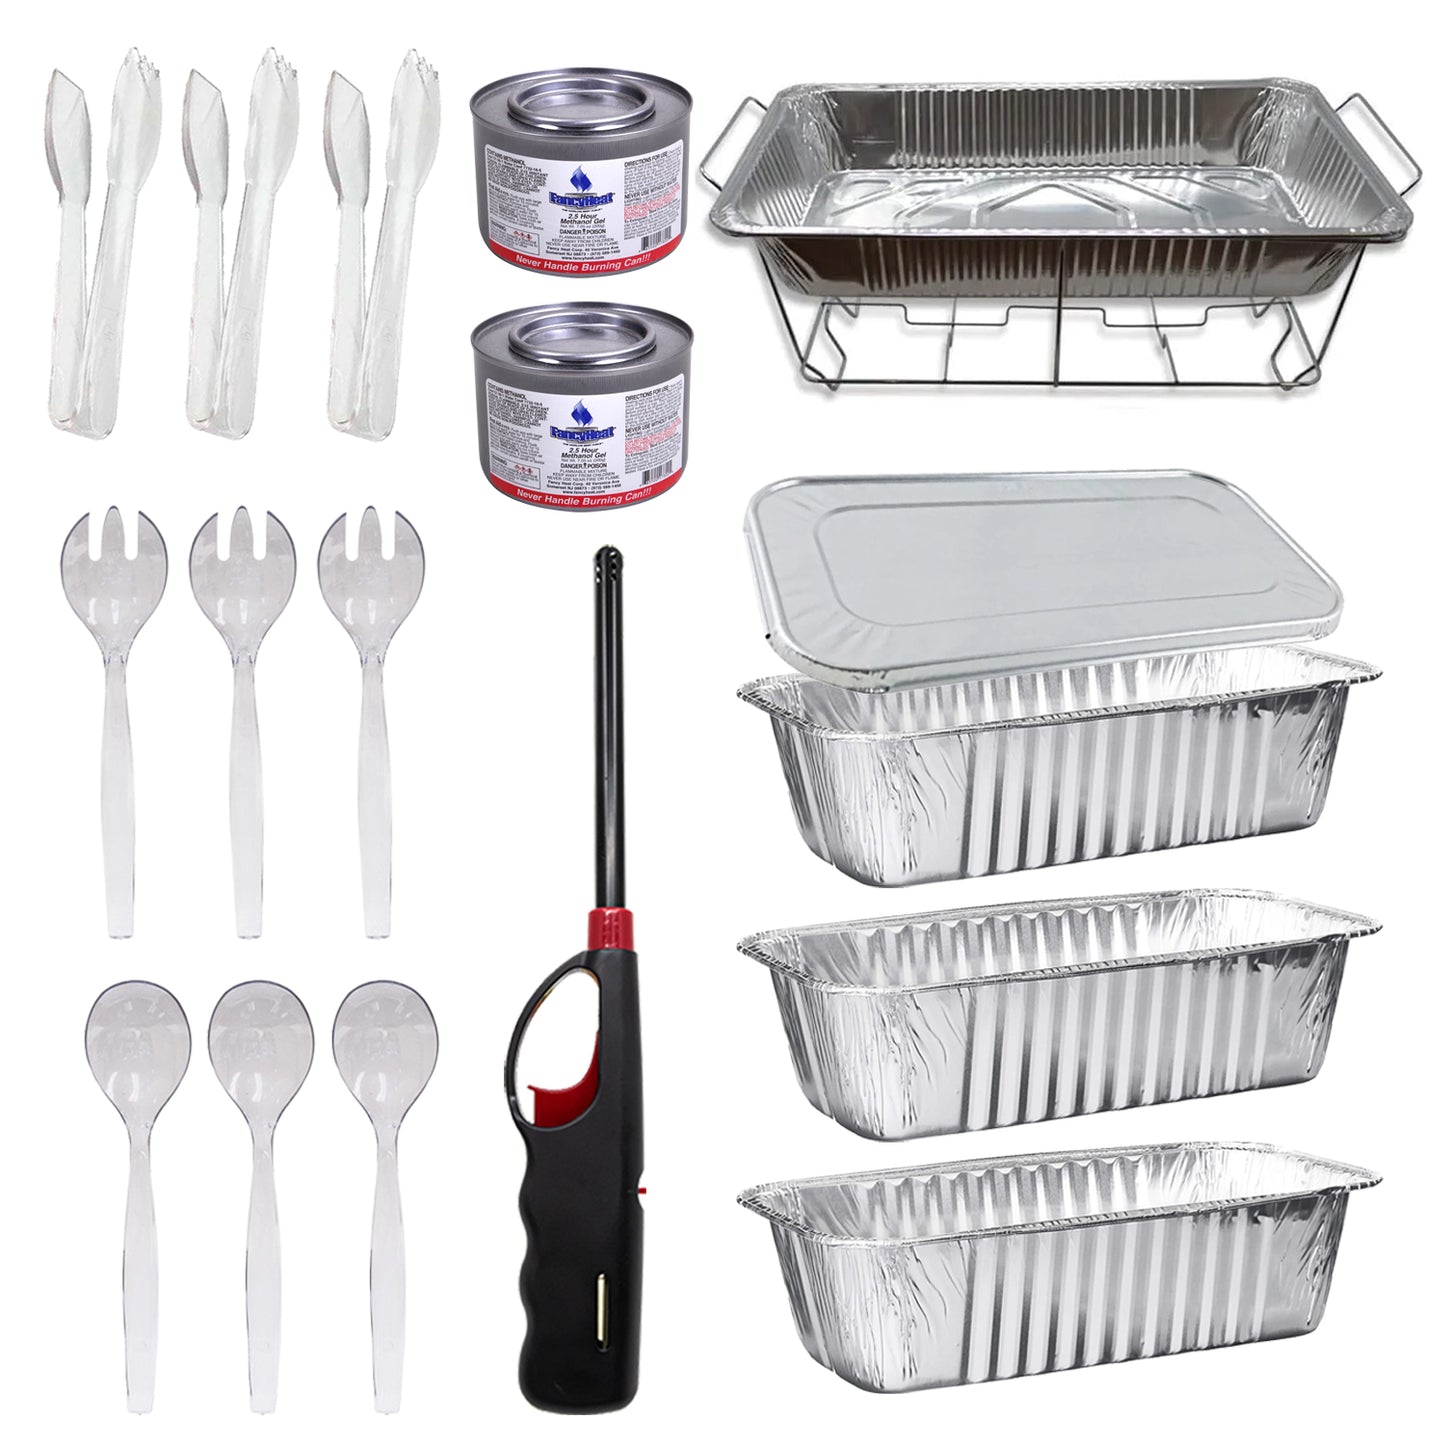 Disposable Aluminum 5LB Loaf Pans Chafing Dish Buffet Party Set with Handy Lighter 20 Pc Disposable Nicole Fantini Collection   